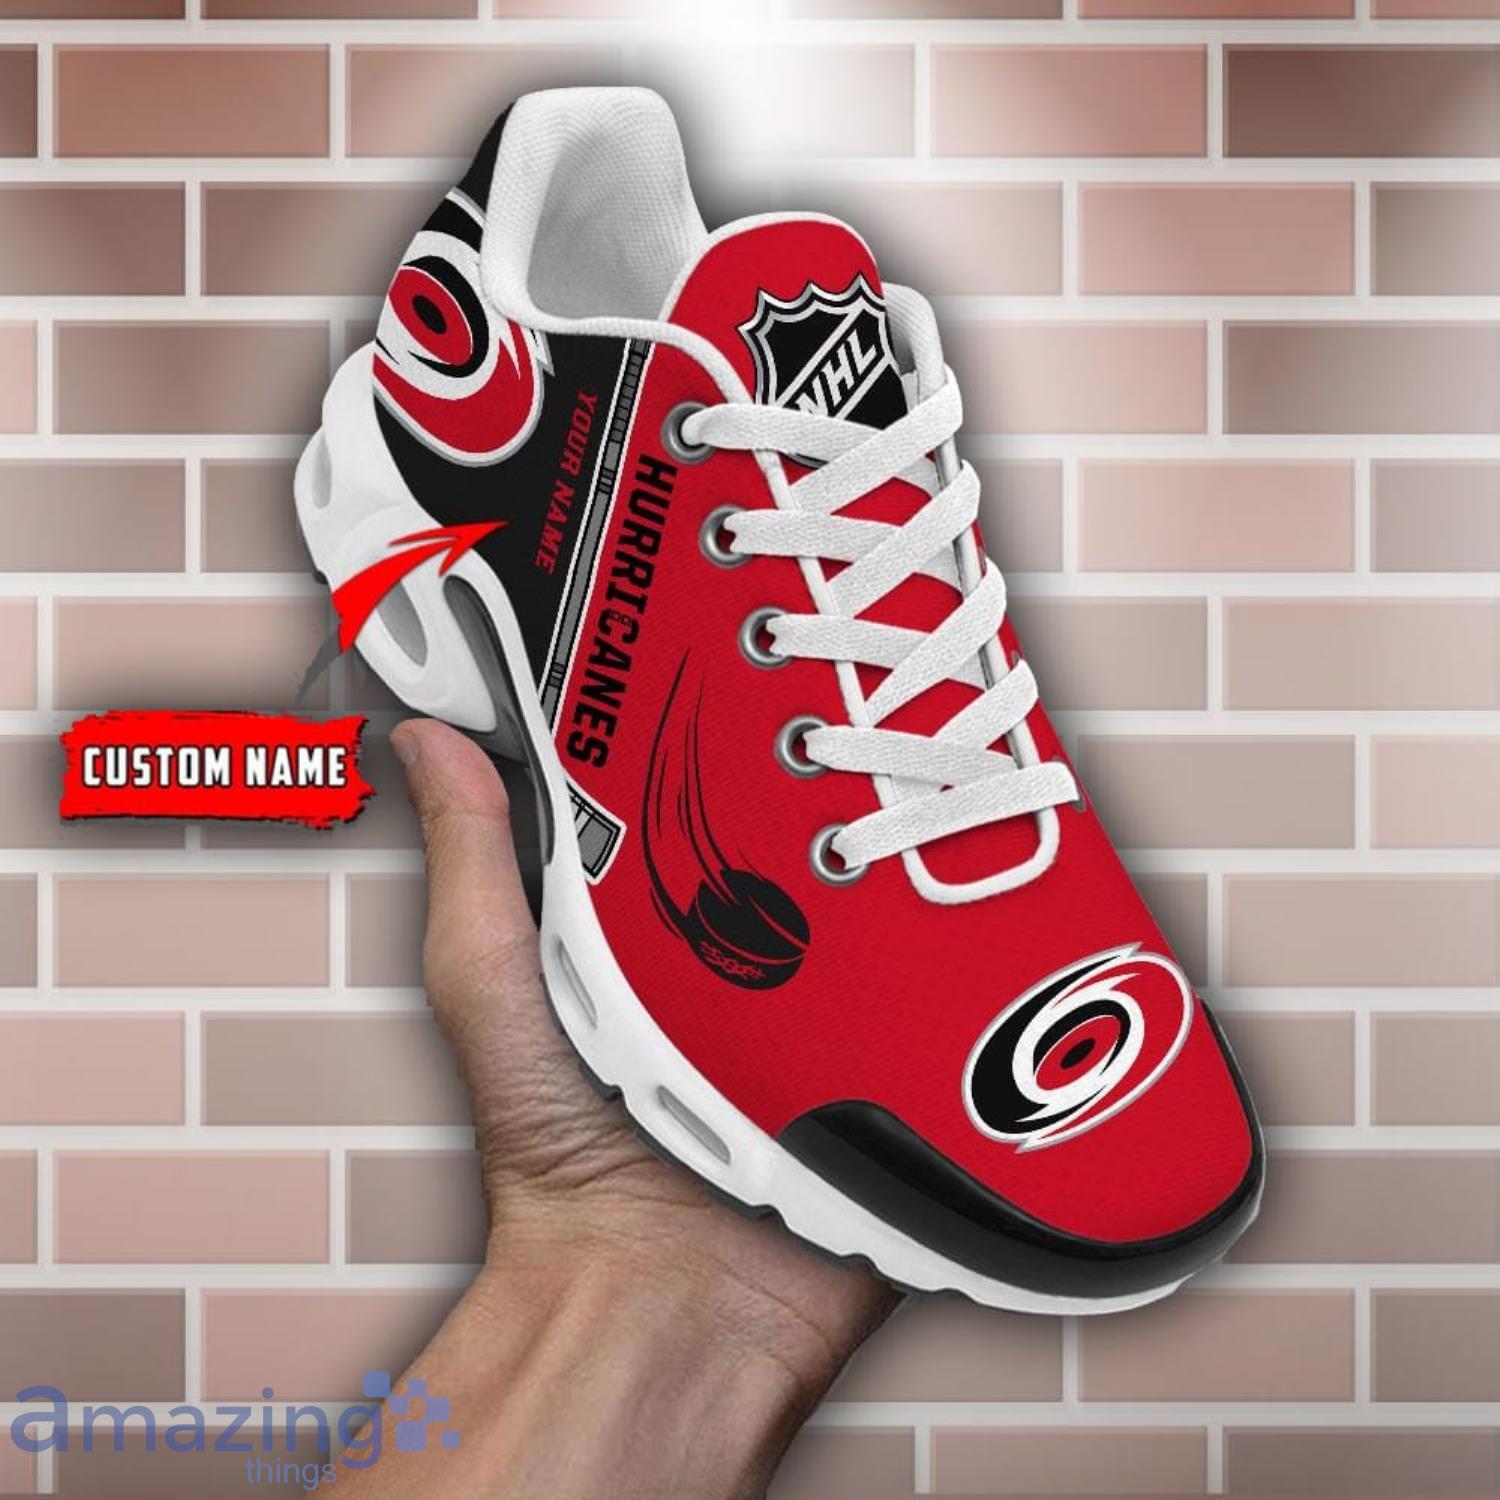 Carolina Hurricanes NHL Custom Name Air Cushion Sports Shoes New Trend Sprot Shoes Product Photo 1